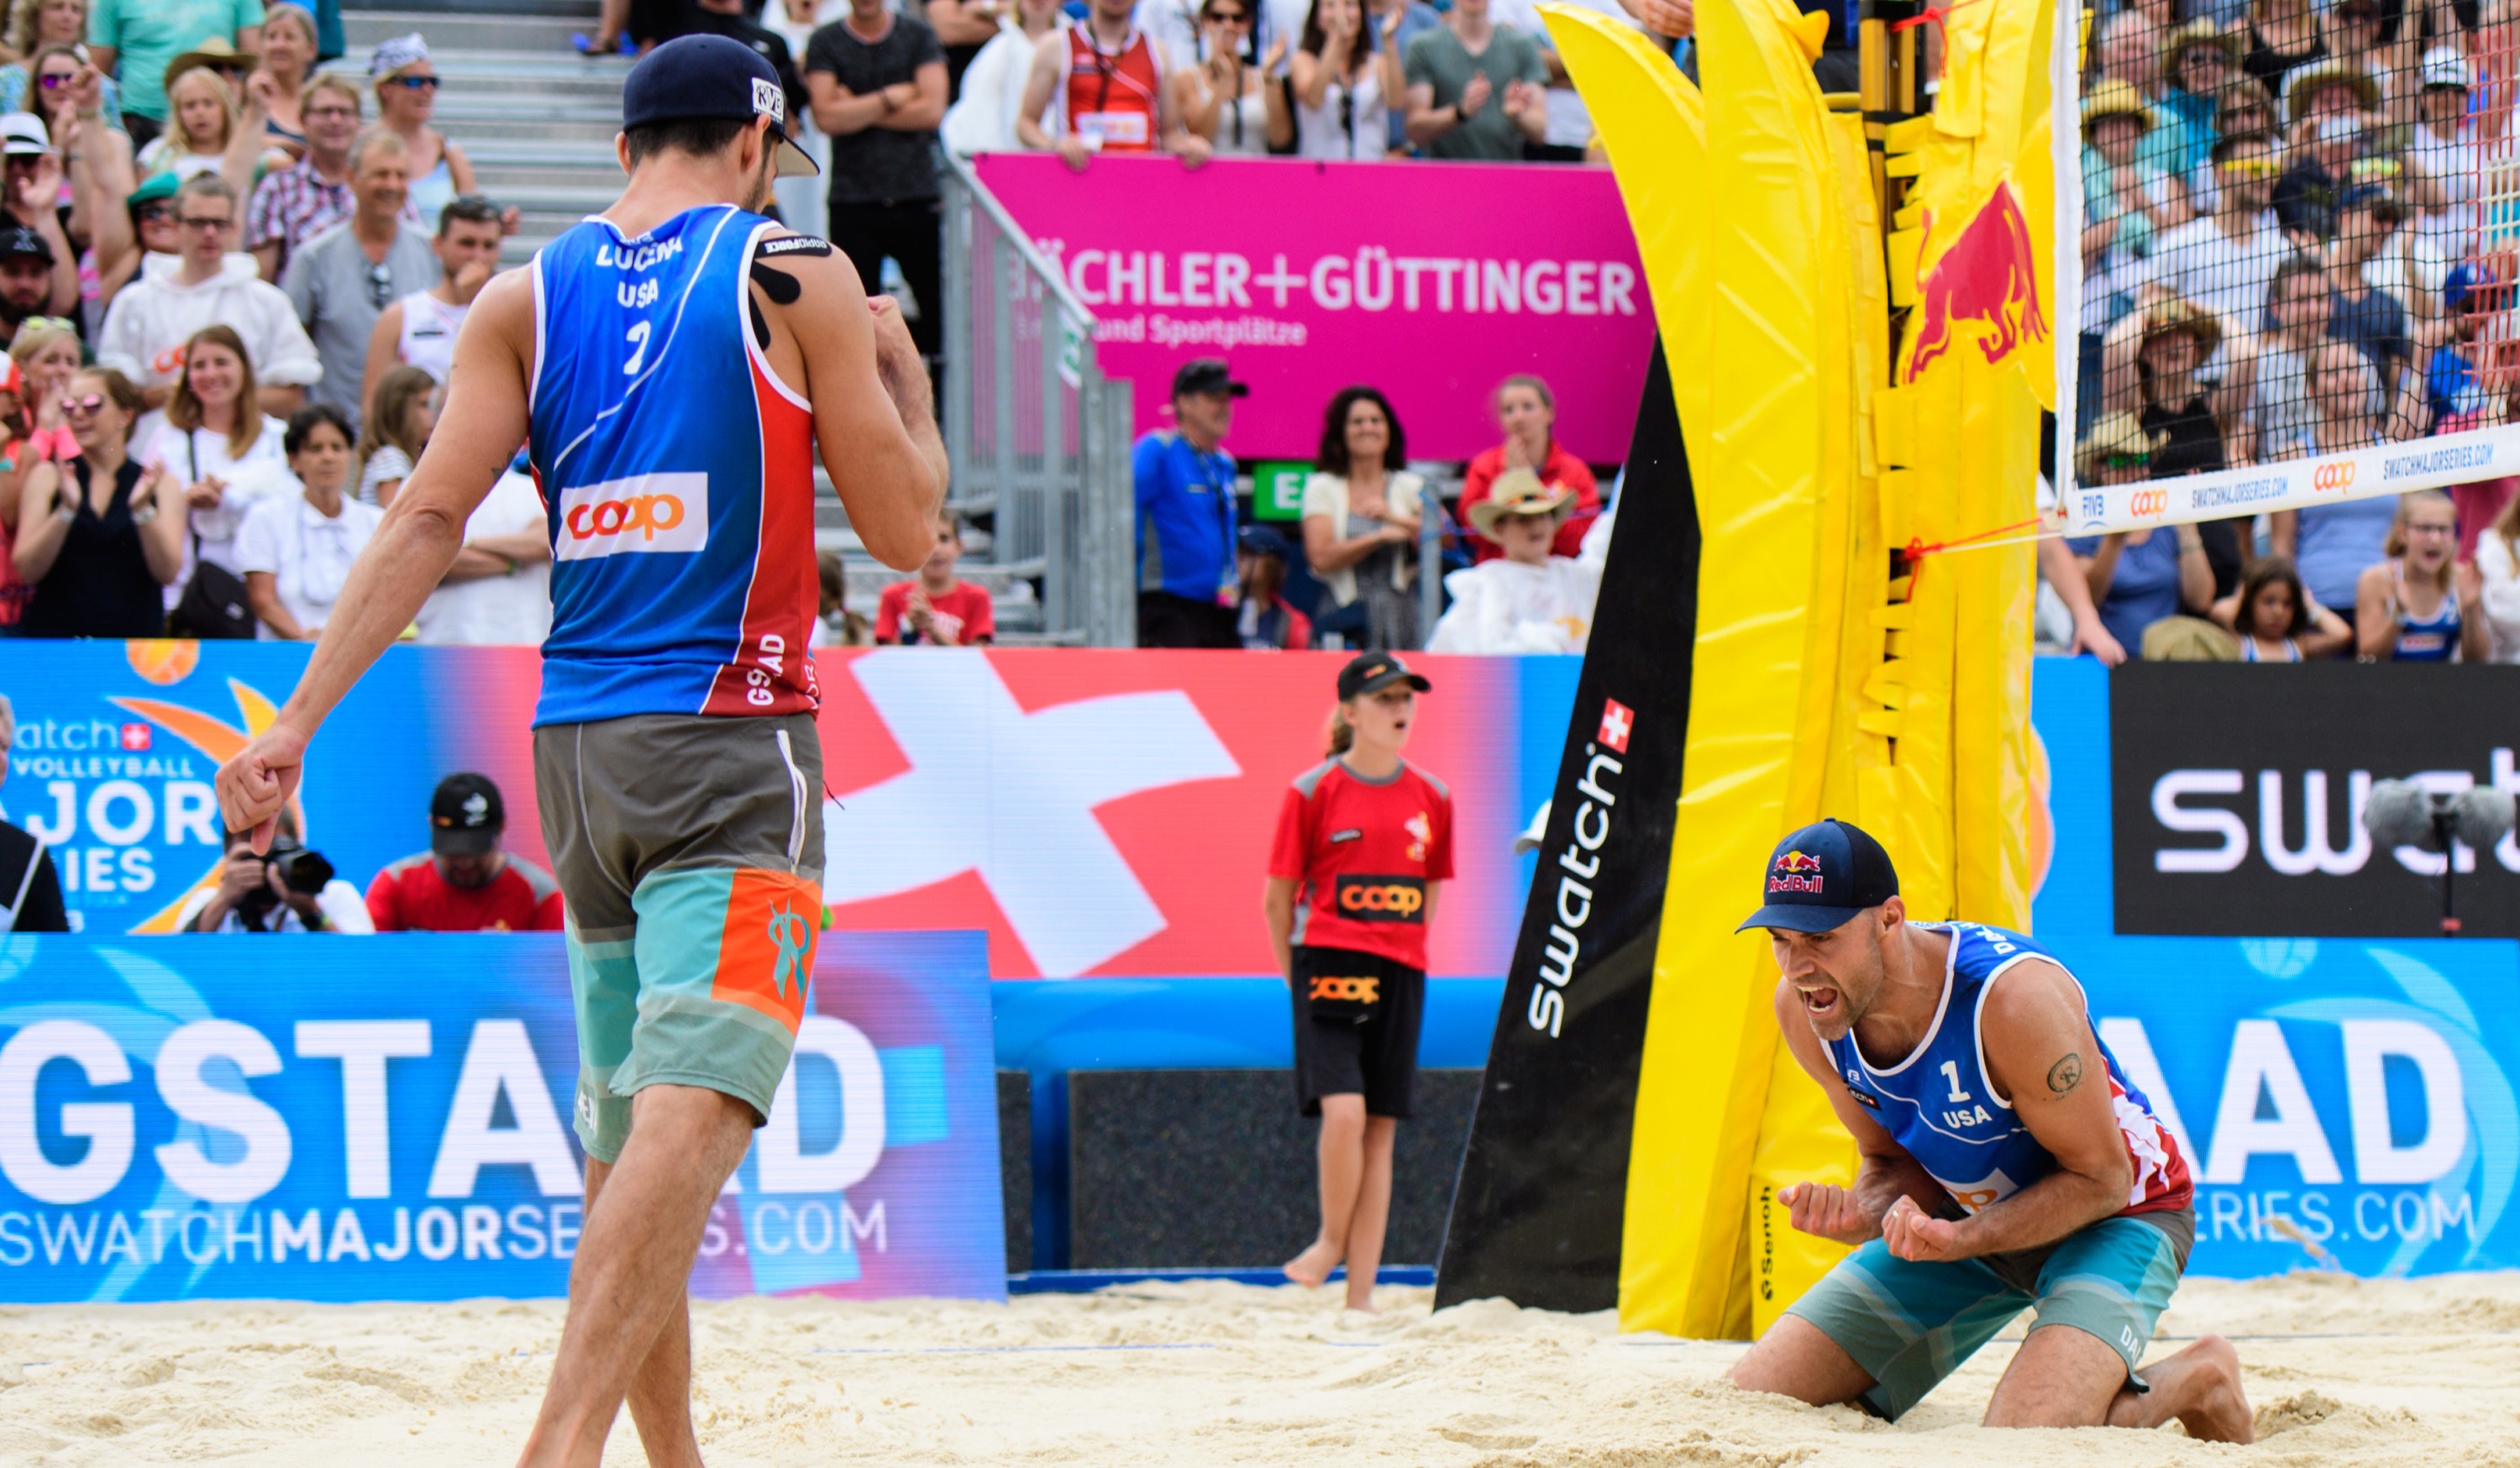 Nick Lucena and Phil Dalhausser Gstaad Major FIVB 2017